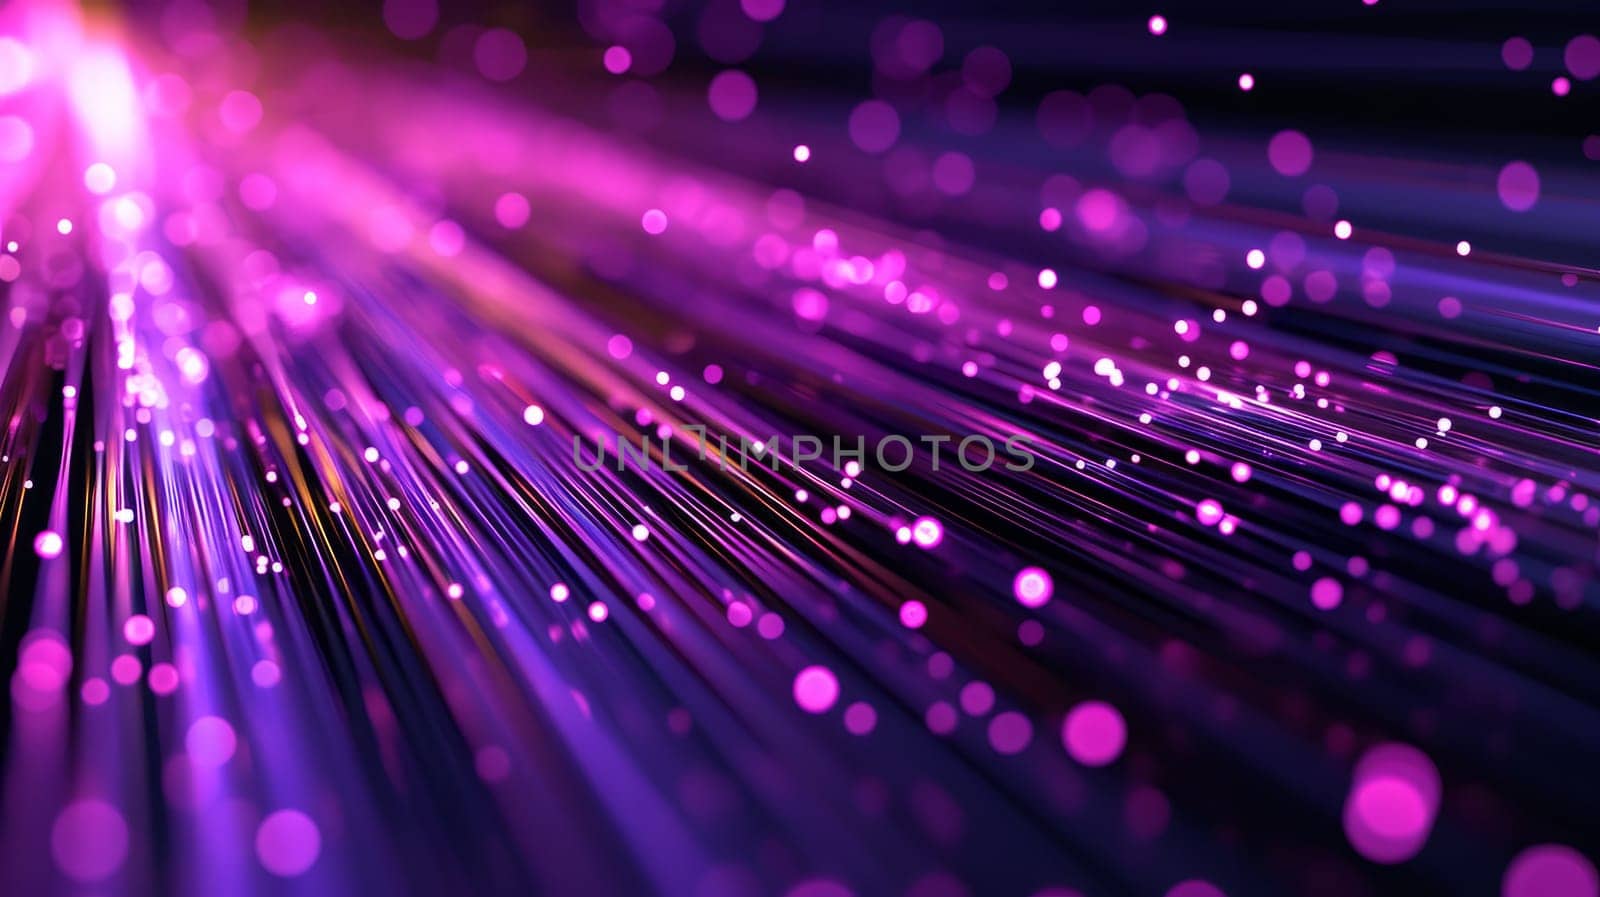 Network technologies. Futuristic tech purple background 3d illustration with glowing particles AI